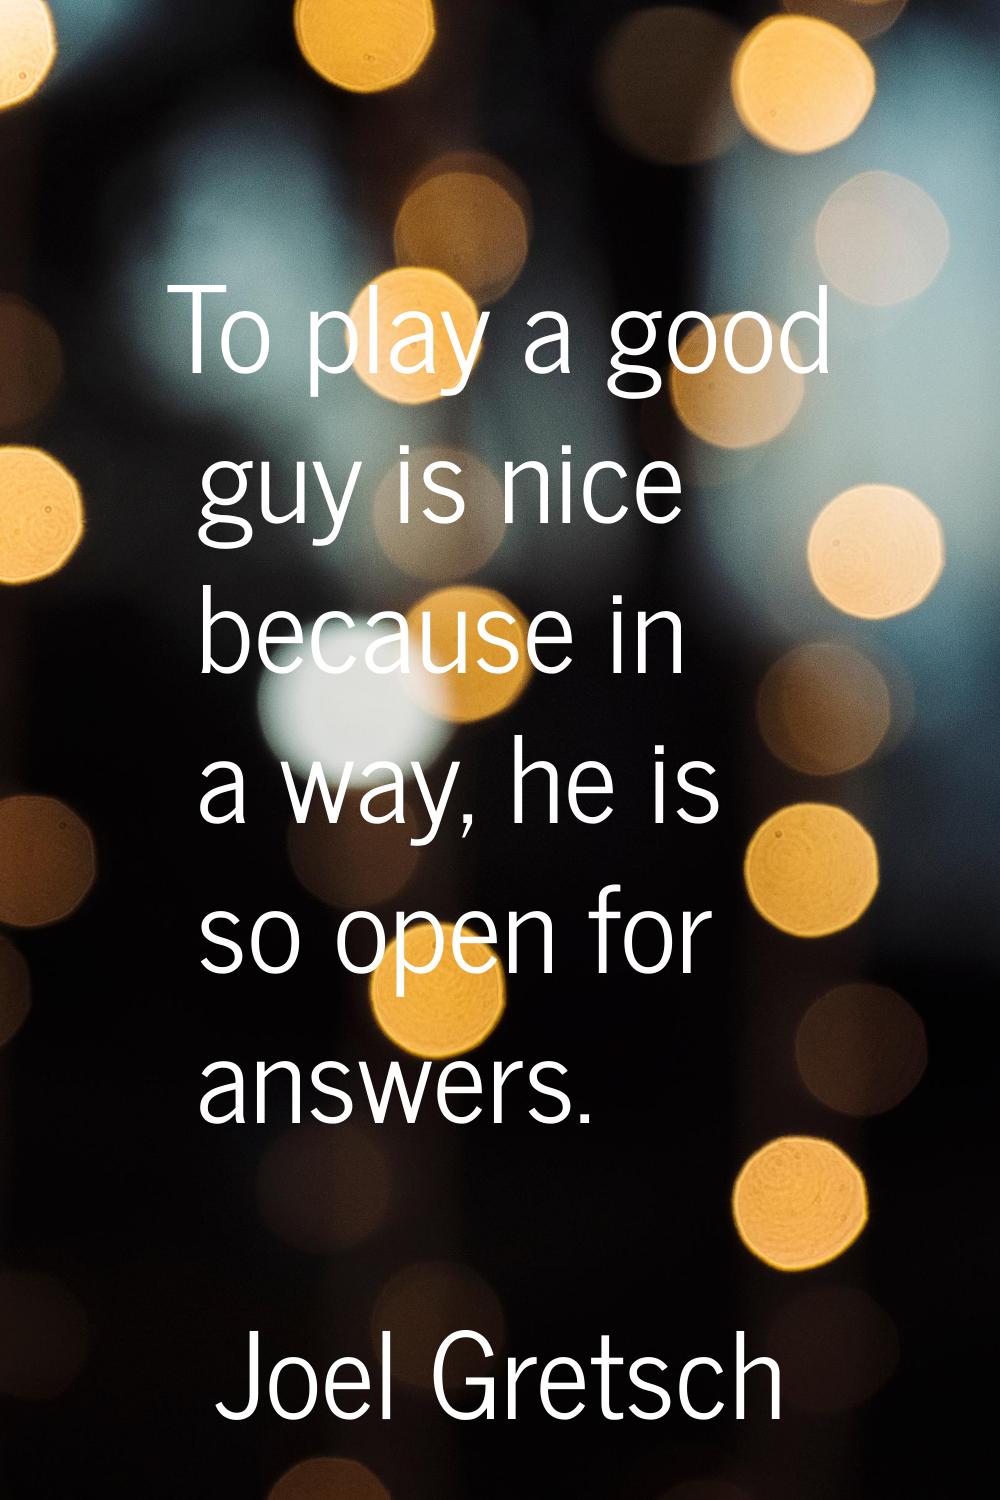 To play a good guy is nice because in a way, he is so open for answers.